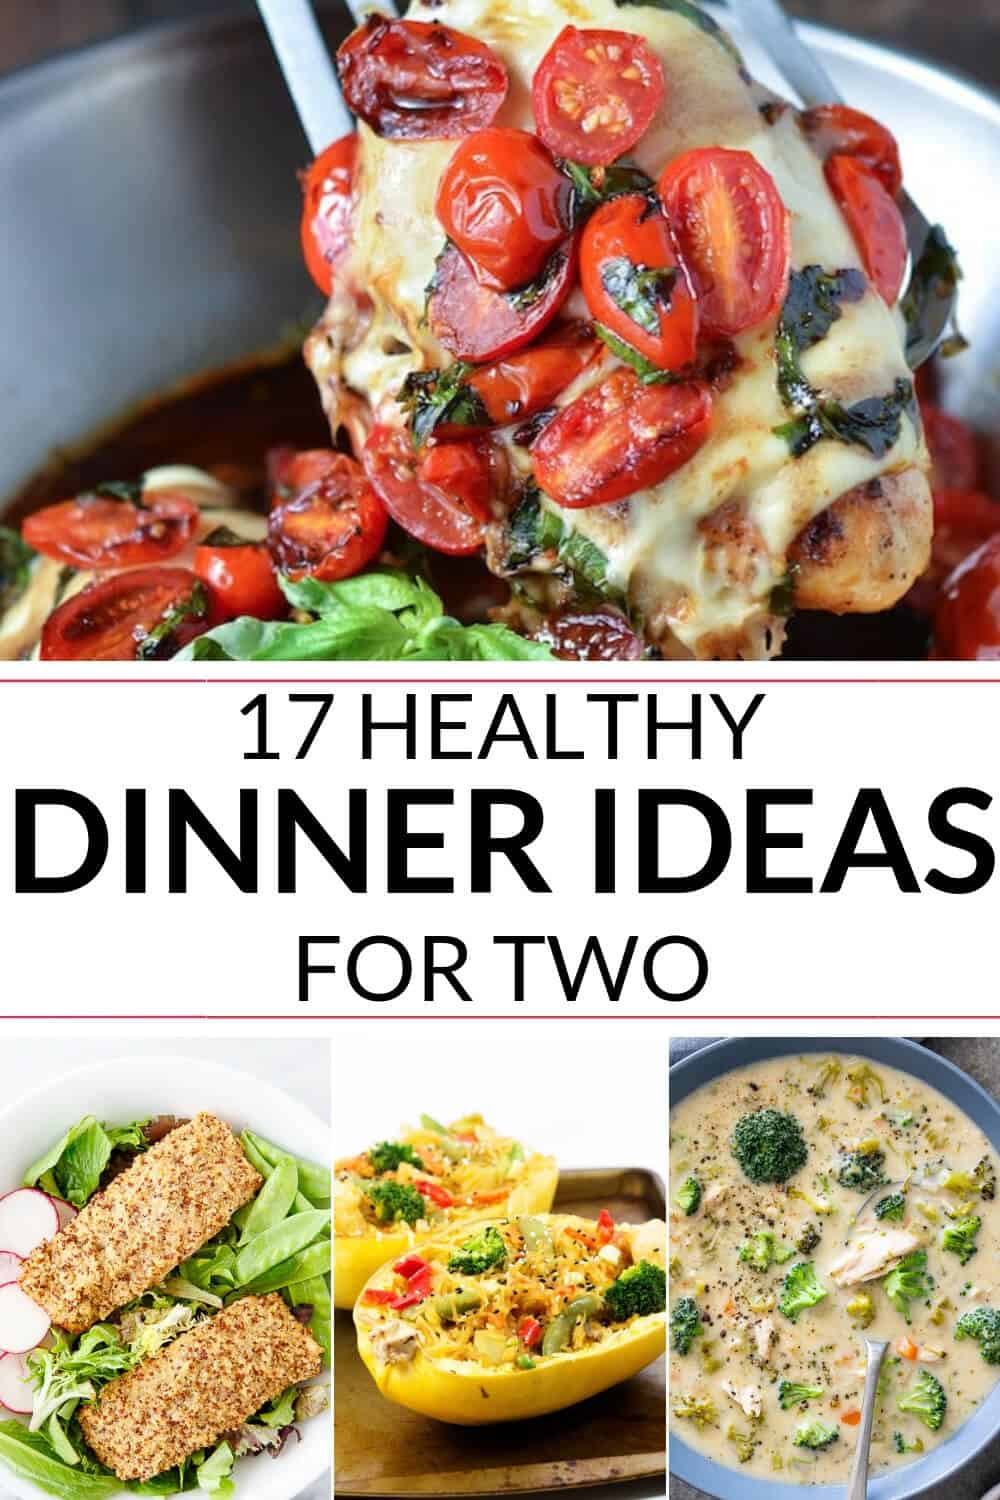 Dinner Recipes Ideas
 Healthy Dinner Ideas for Two